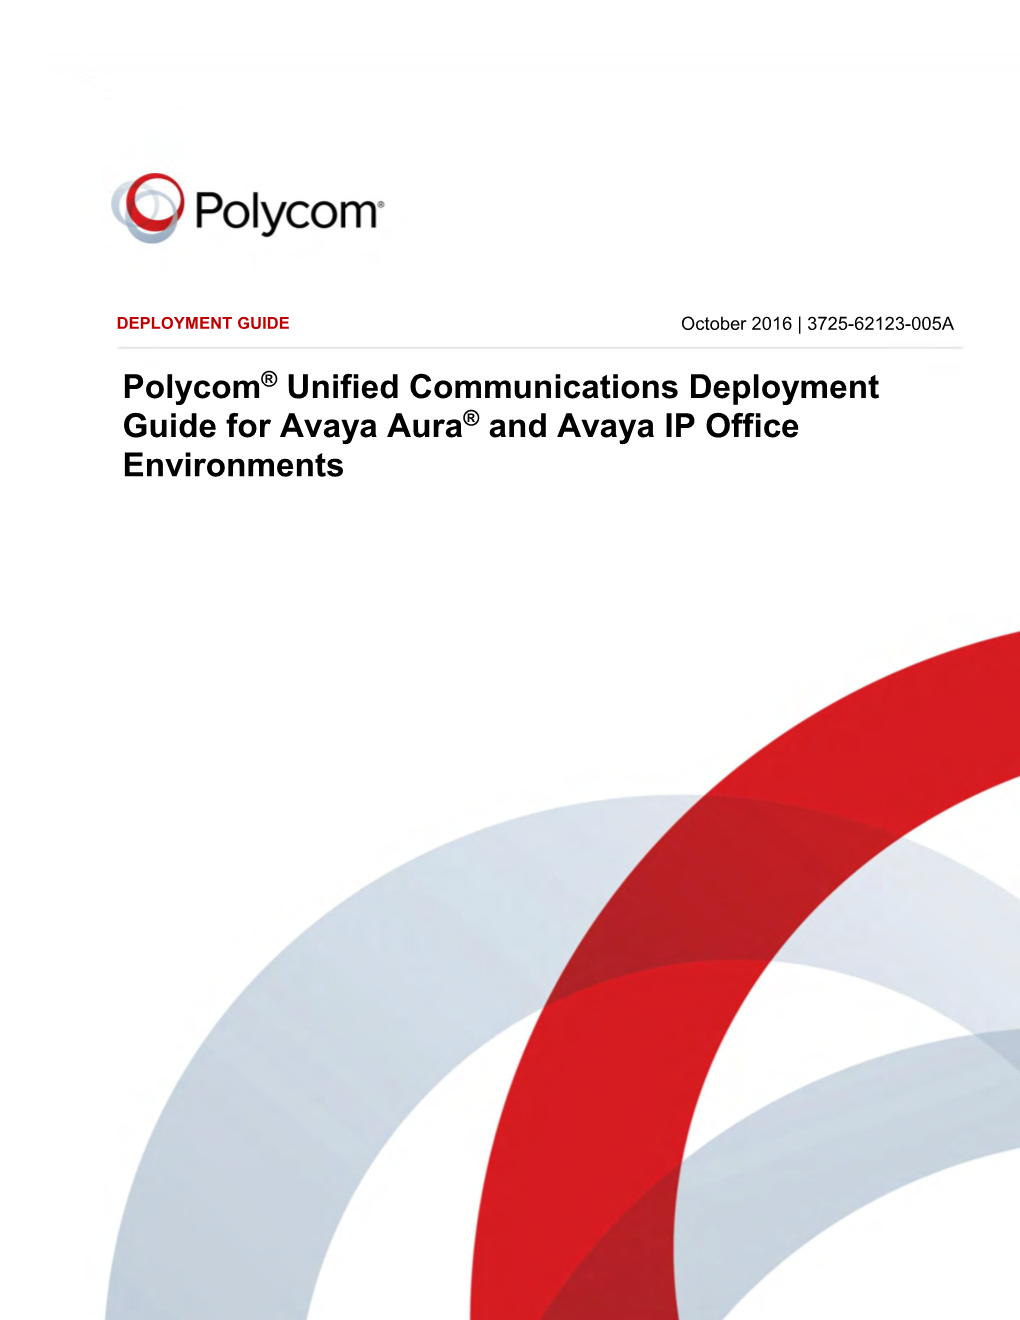 Polycom® Unified Communications Deployment Guide for Avaya Aura® and Avaya IP Office Environments